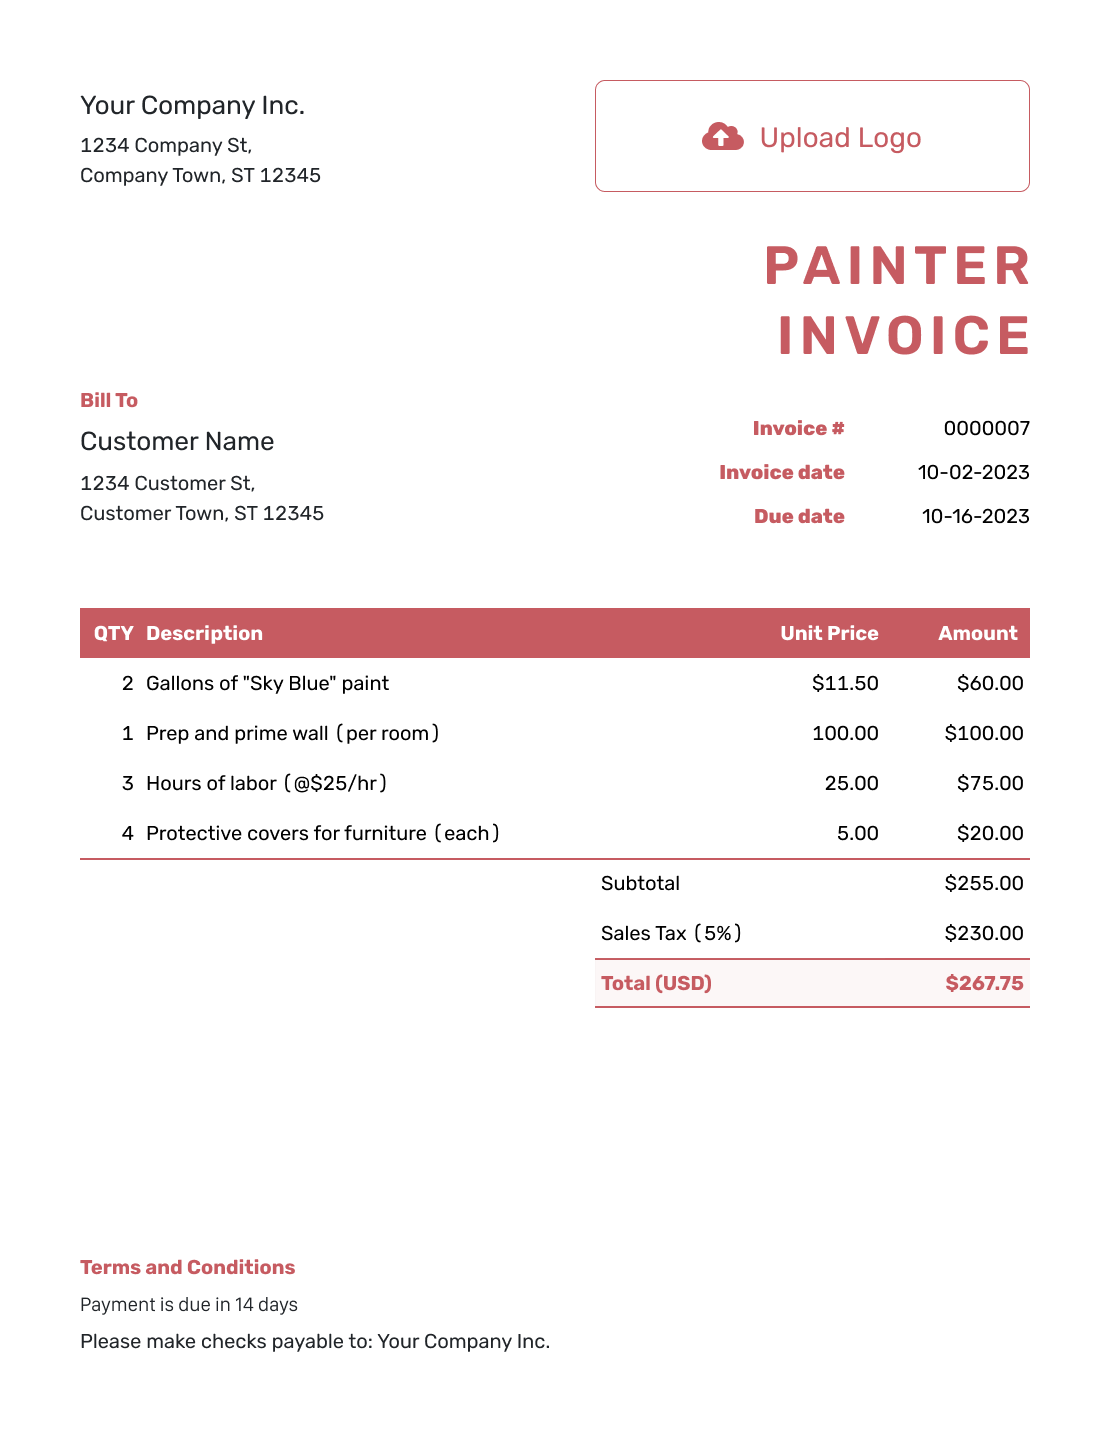 Itemized Painter Invoice Template